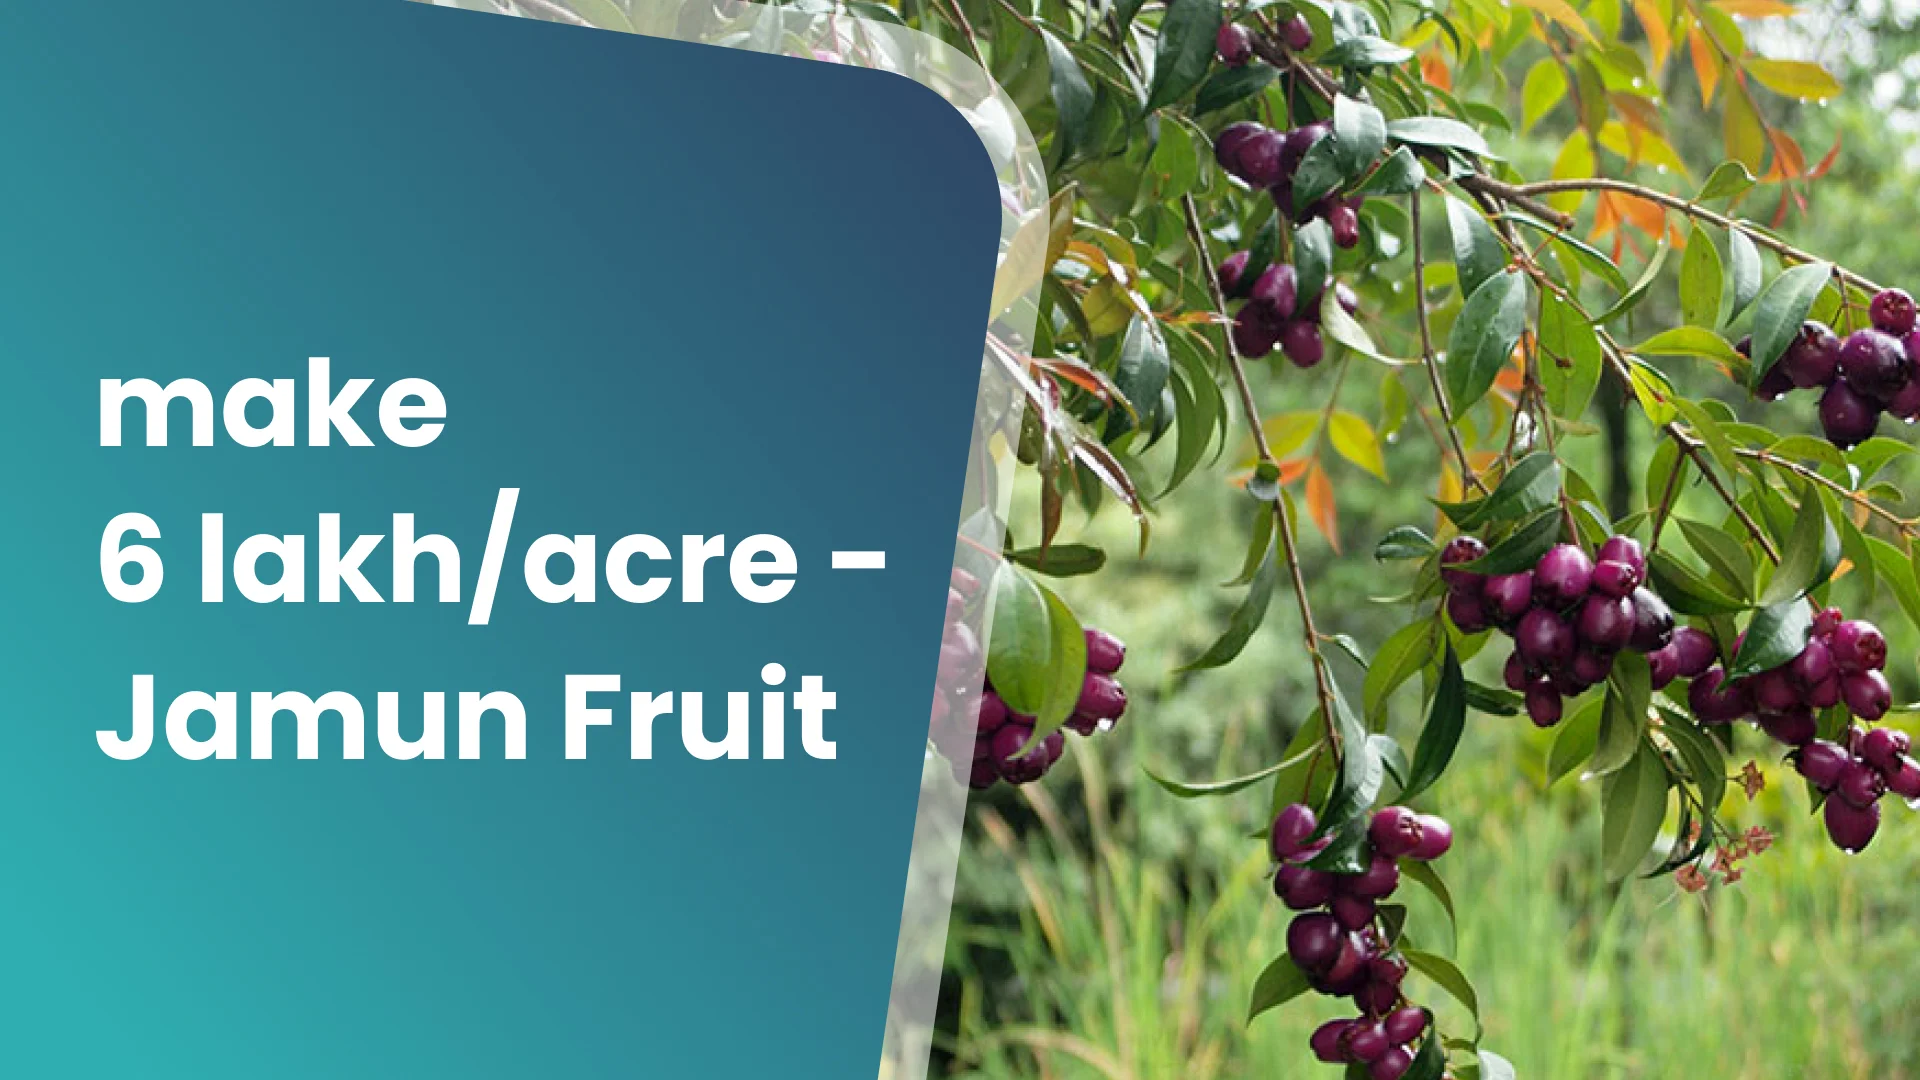 Course Trailer: Jamun Fruit Farming Course - Earn 6 lakh/acre. Watch to know more.